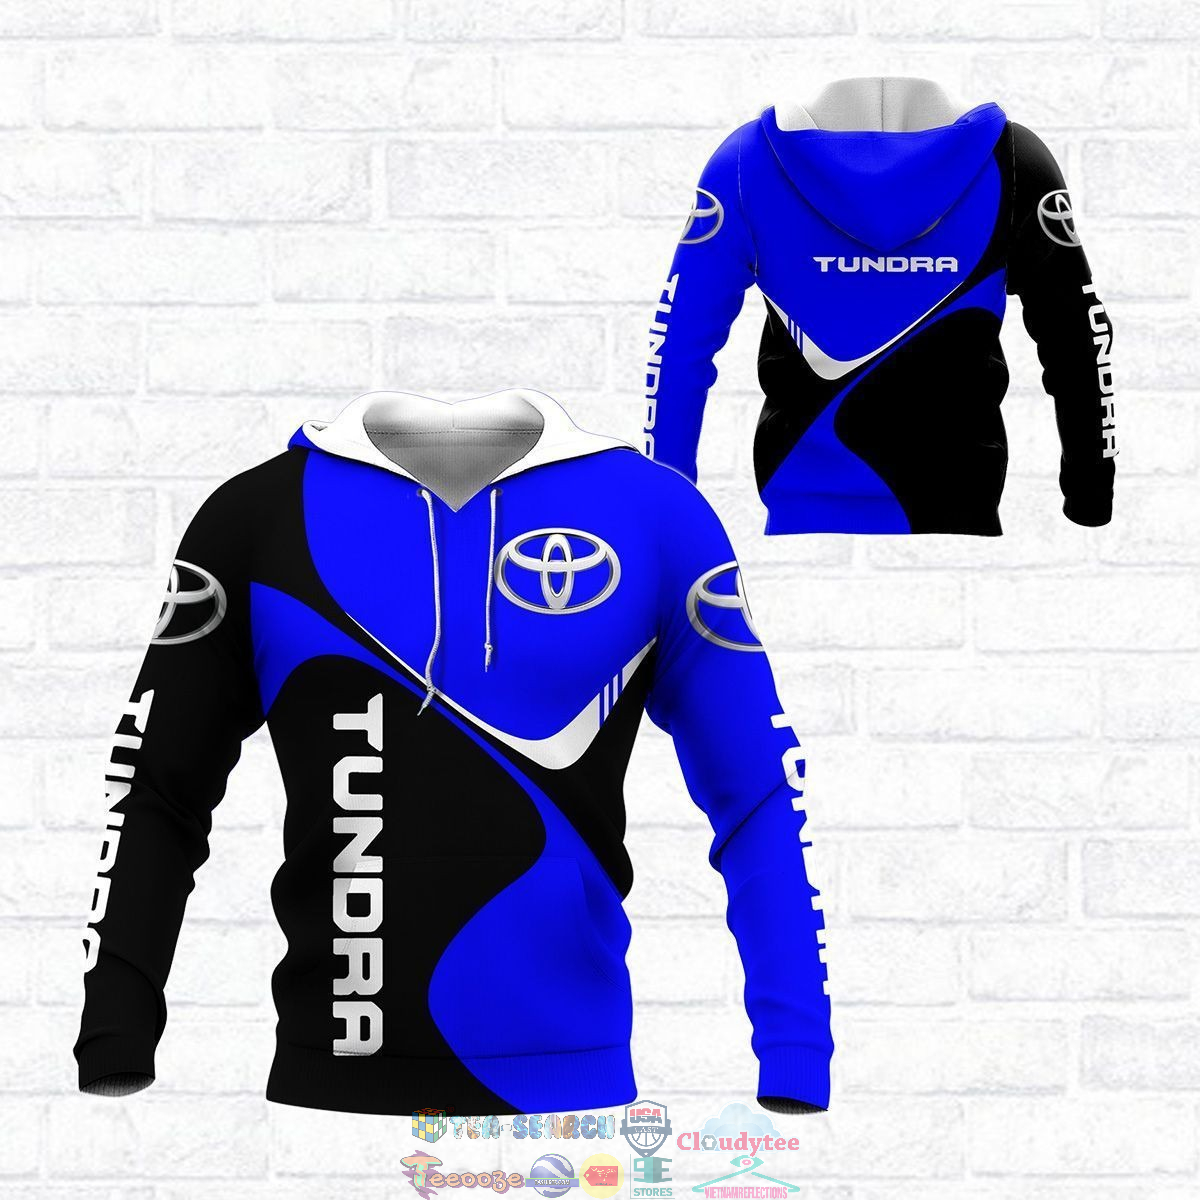 Toyota Tundra ver 9 3D hoodie and t-shirt